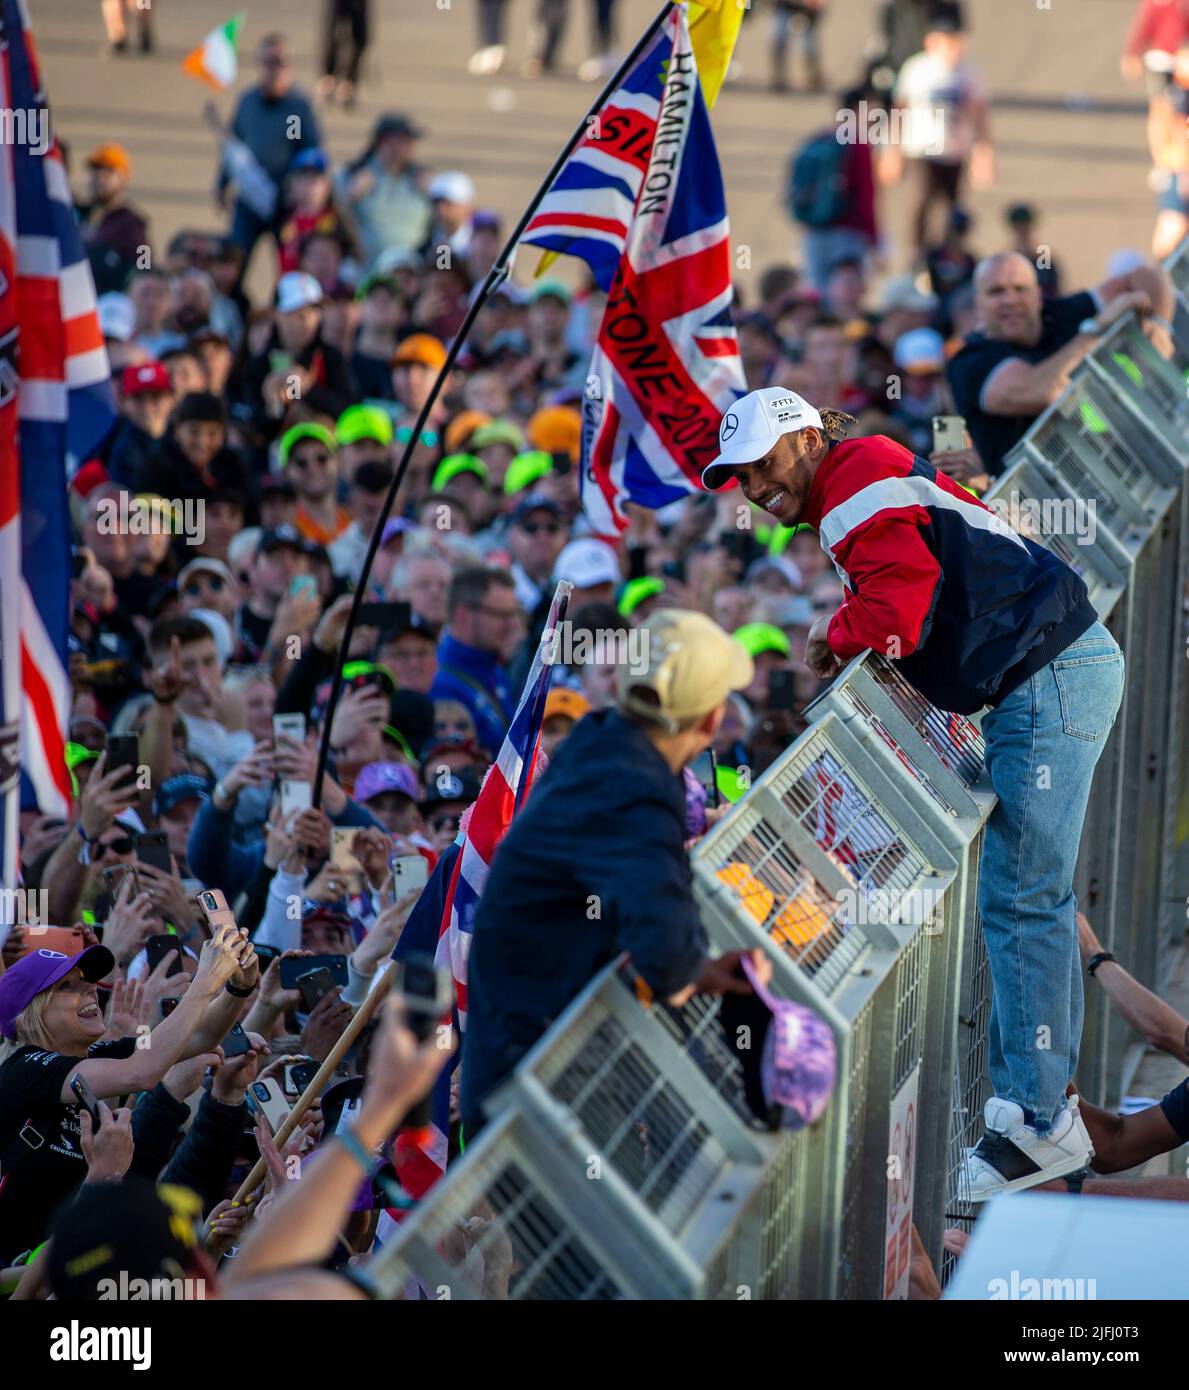 Silverstone, UK. 3rd July 2022, Silverstone Circuit, Silverstone, Northamptonshire, England: British F1 Grand Prix, Race day: Mercedes-AMG Petronas F1 Team driver Lewis Hamilton climbs the fence to meet his fans Credit: Action Plus Sports Images/Alamy Live News Stock Photo